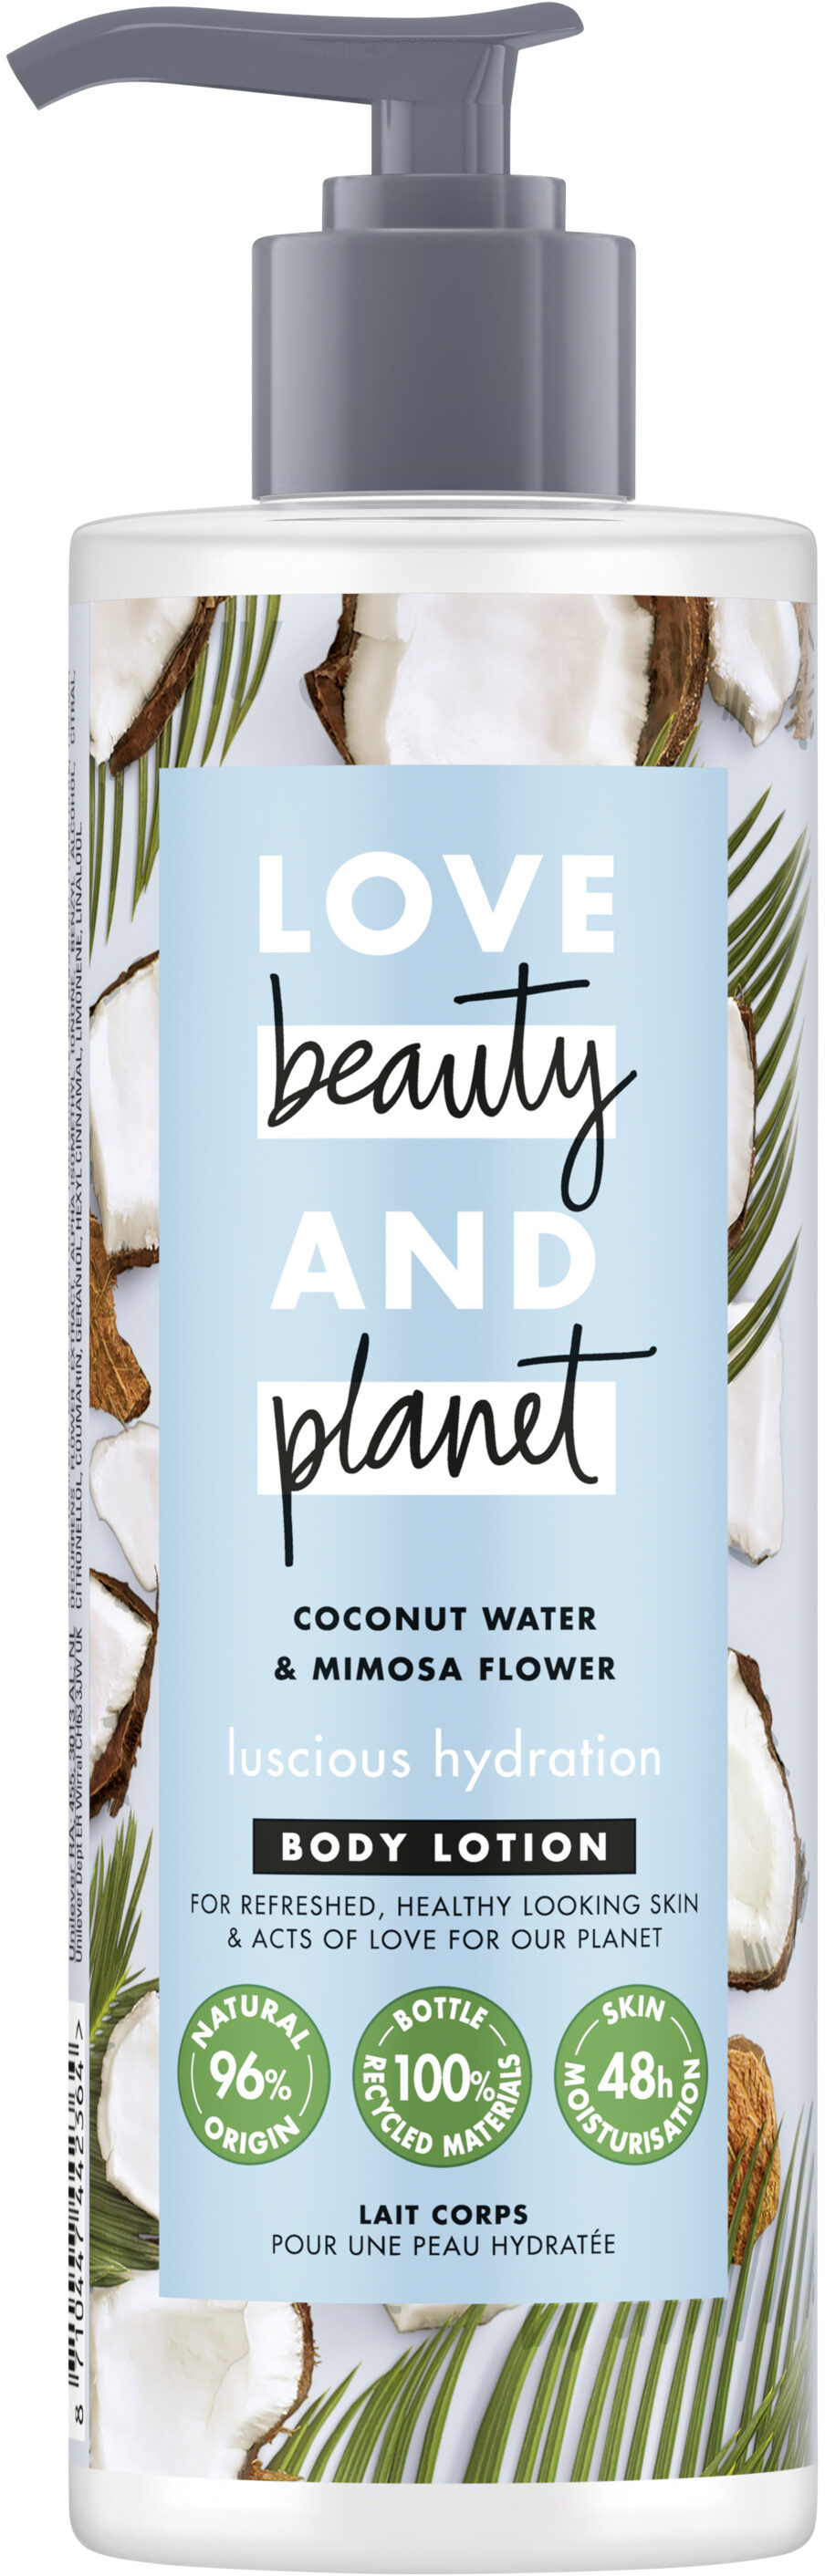 Love Beauty And Planet Lait Corps Hydratation Sublime 400ml - Tuote - fr